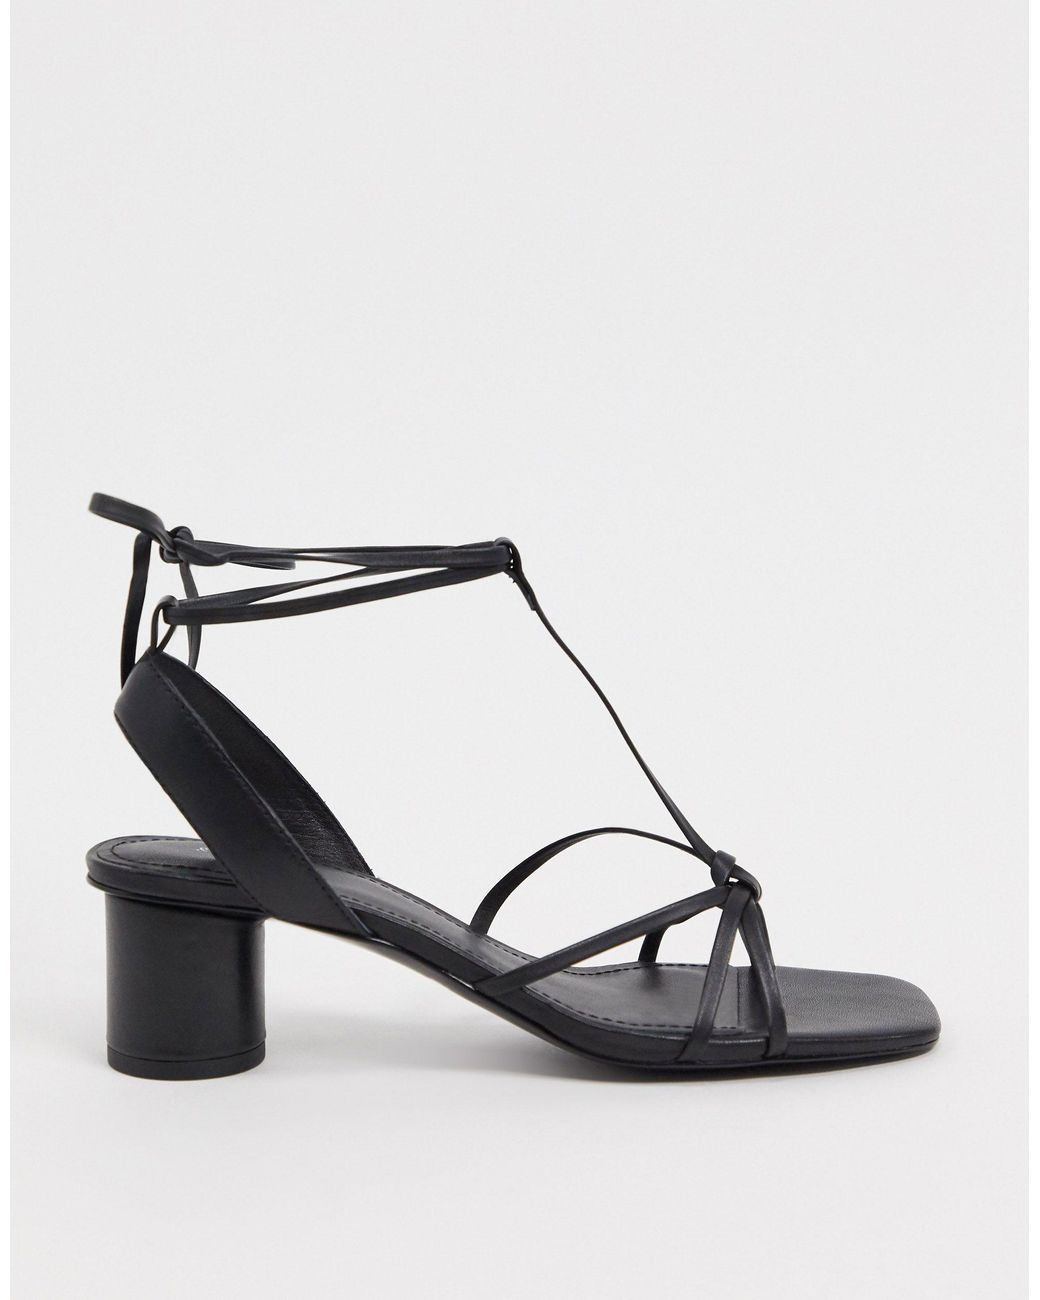 Other Stories Square Toe Leather Strappy Heeled Sandals in Black